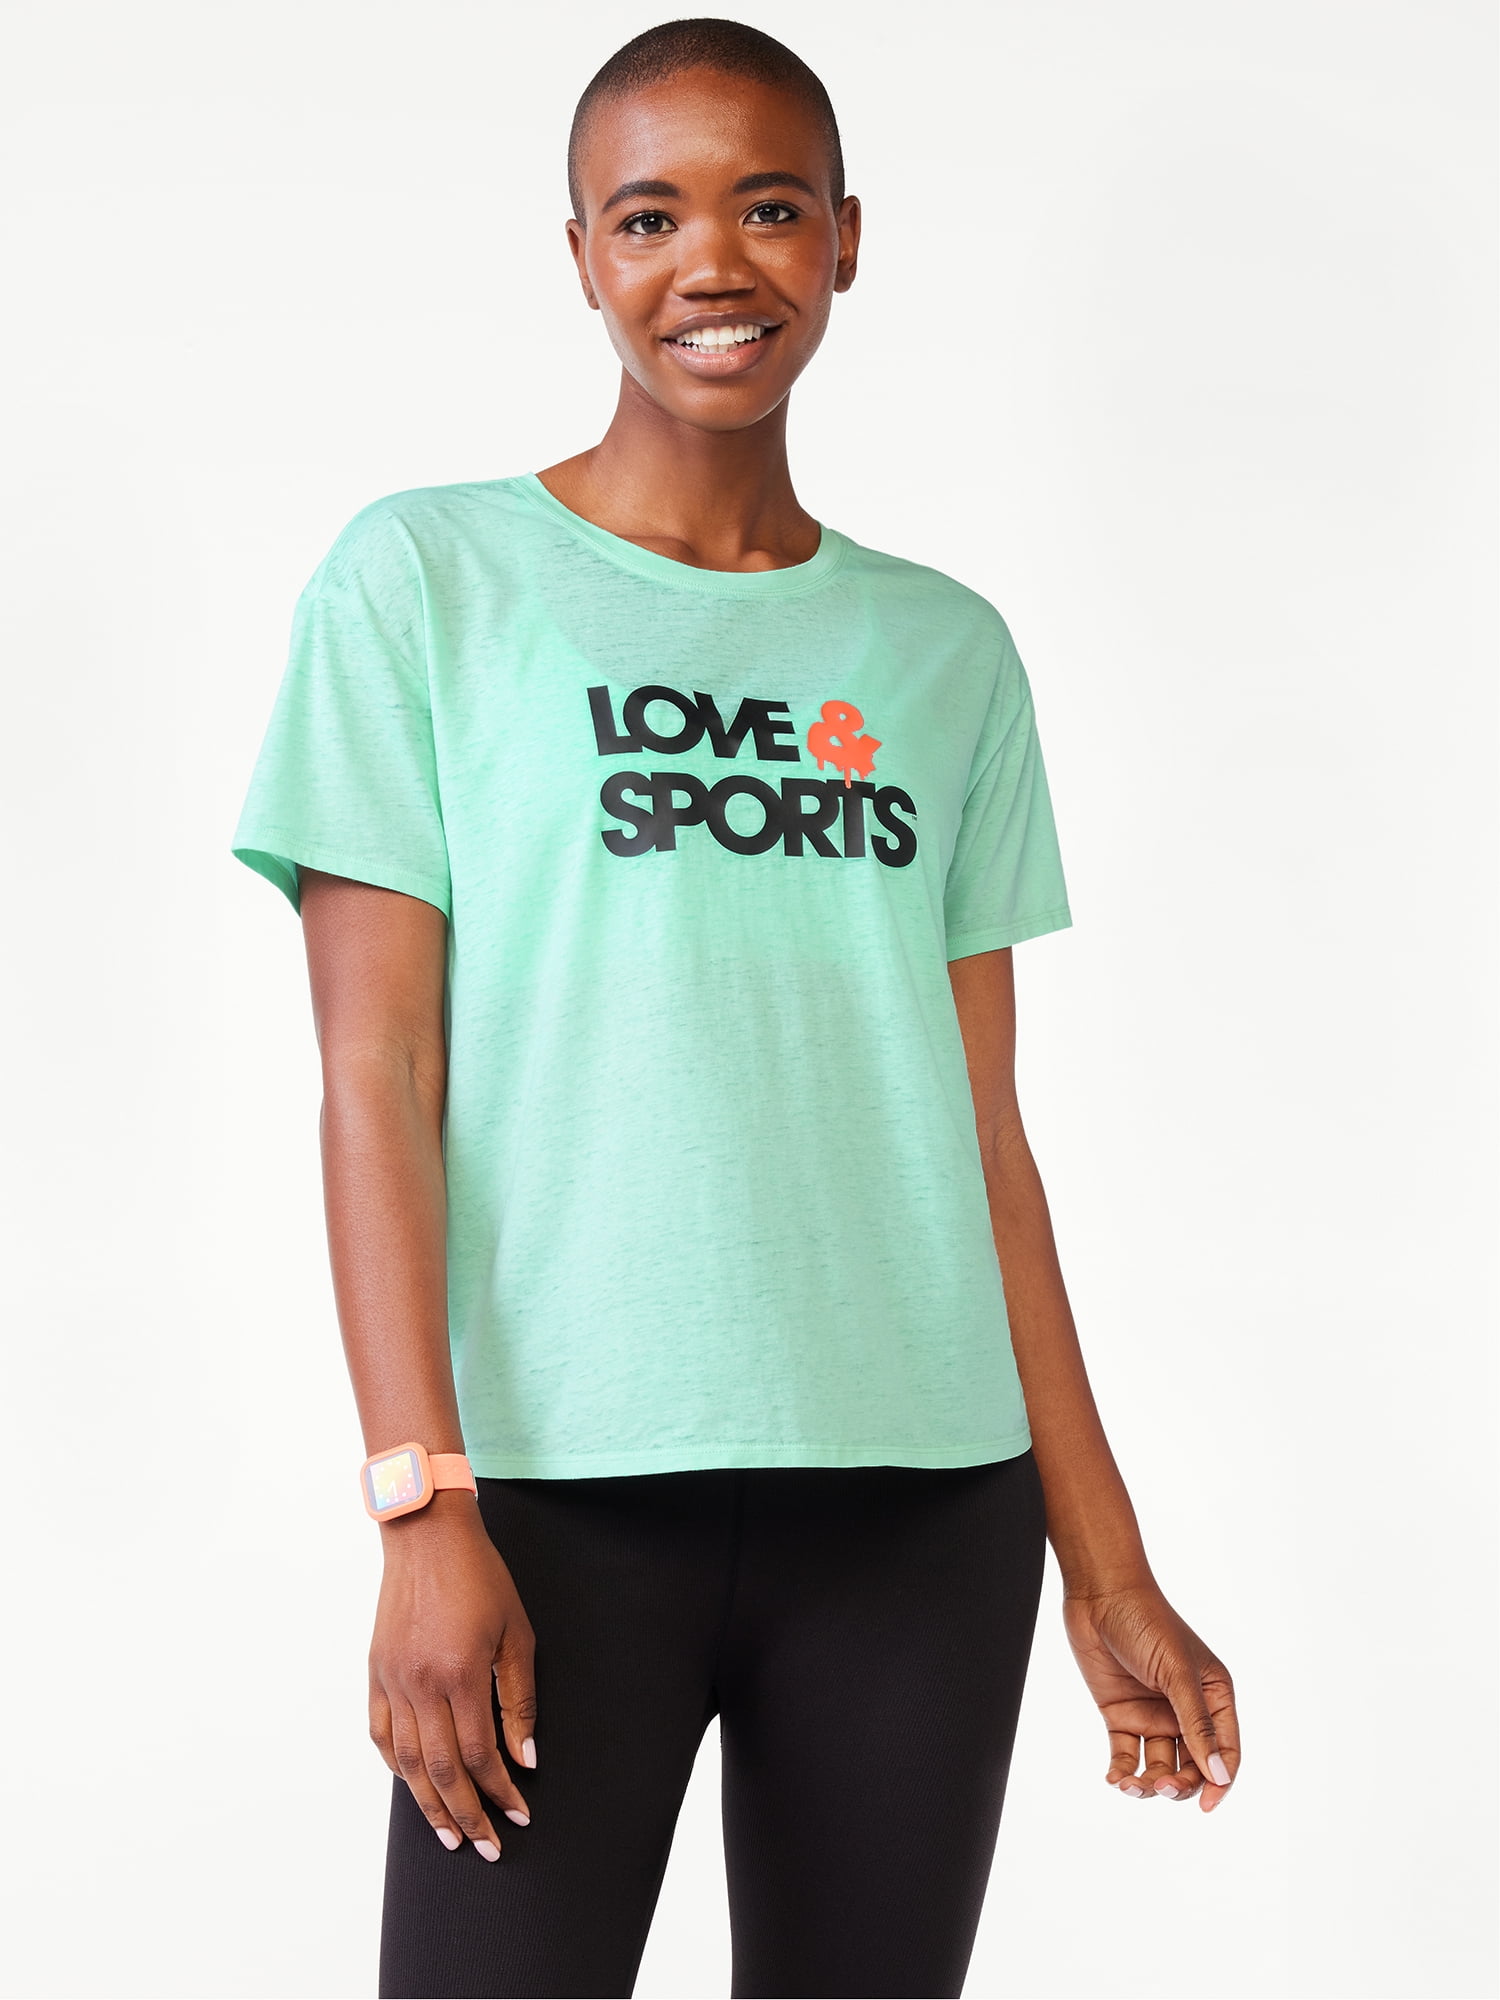 Love & Sports Women's Logo Tee with Short Sleeves, Sizes XS-3XL ...